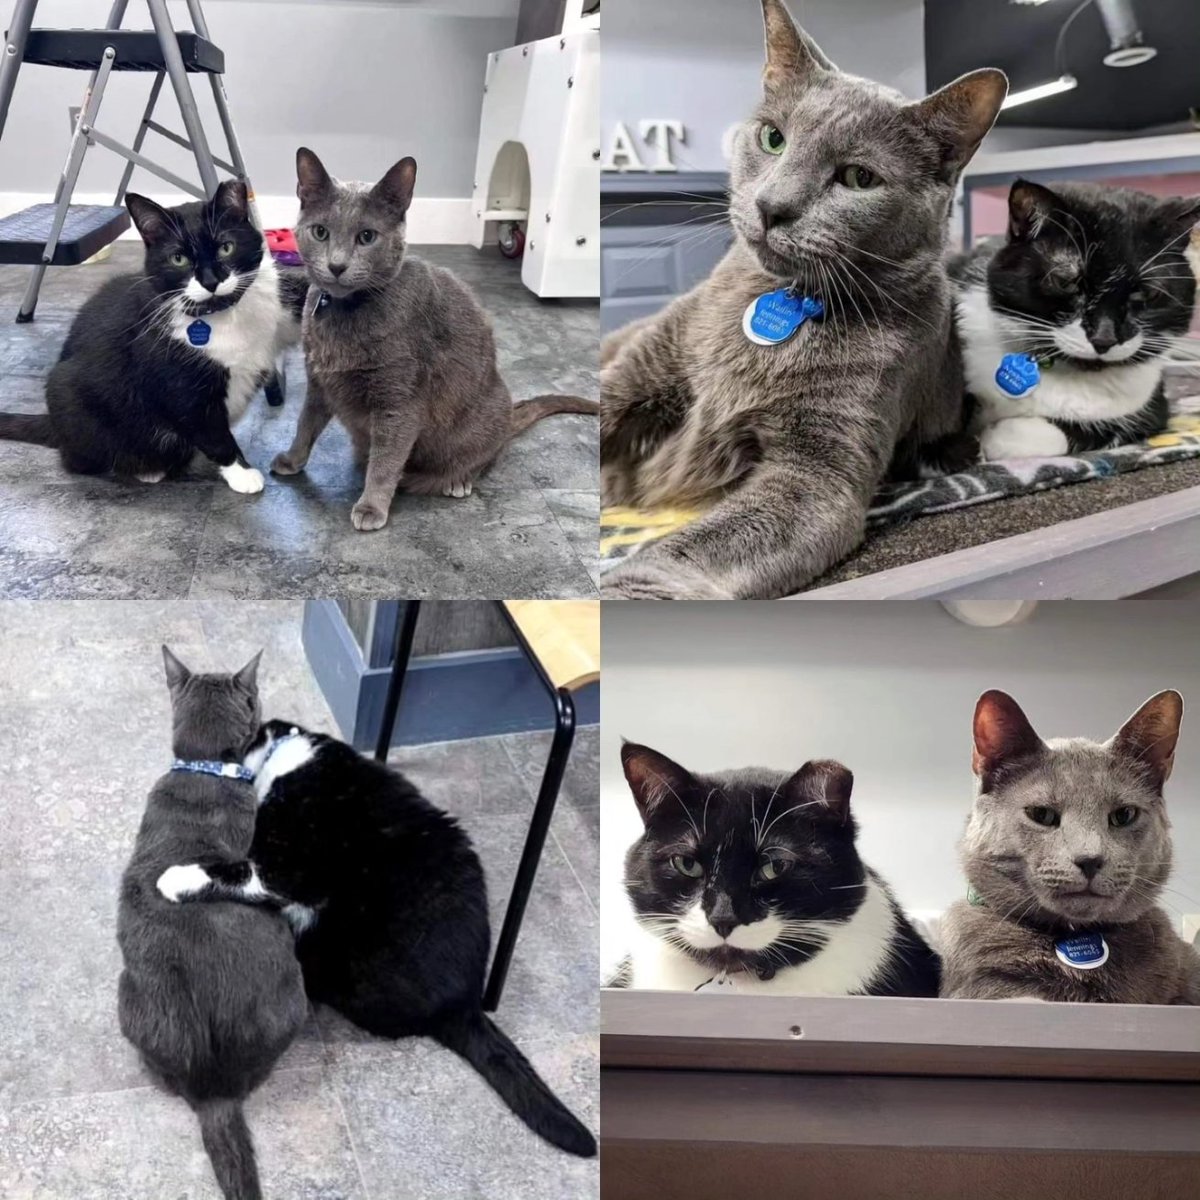 Bonded pair Wayne Newton (tux) and Wailin Jennings are looking for a home to call their own. Learn more about this dynamic duo here 👇 petfinder.com/cat/wailin-jen…